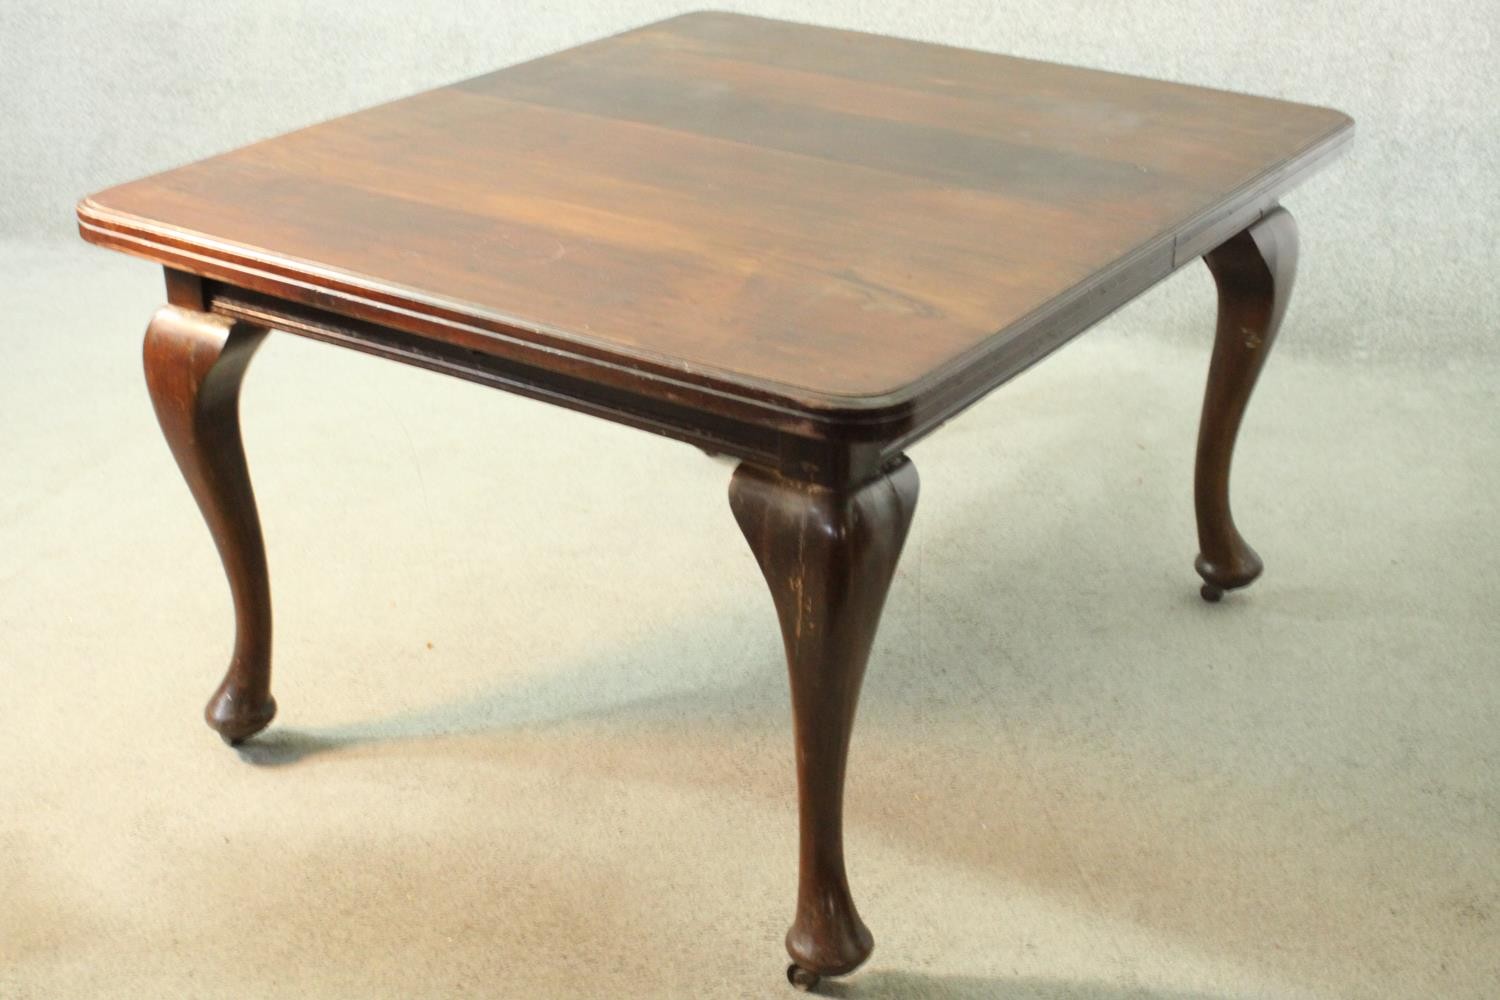 Dining table, C.1900 mahogany extending. (With winding handle but no leaf). H.71 W.125 D.105cm. - Image 2 of 6